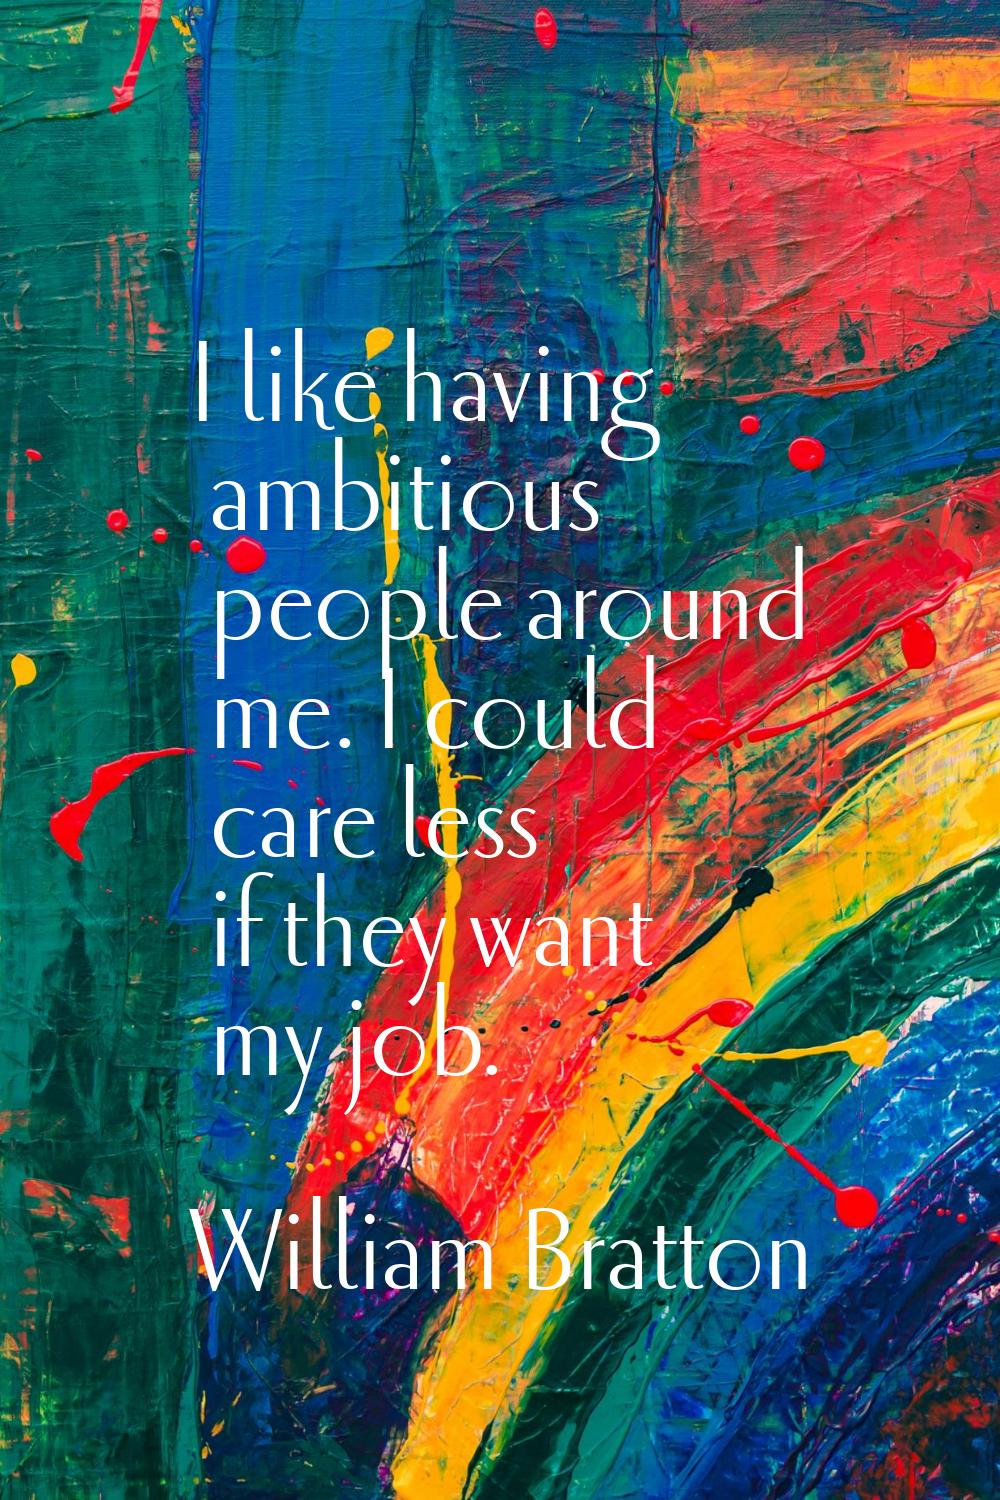 I like having ambitious people around me. I could care less if they want my job.